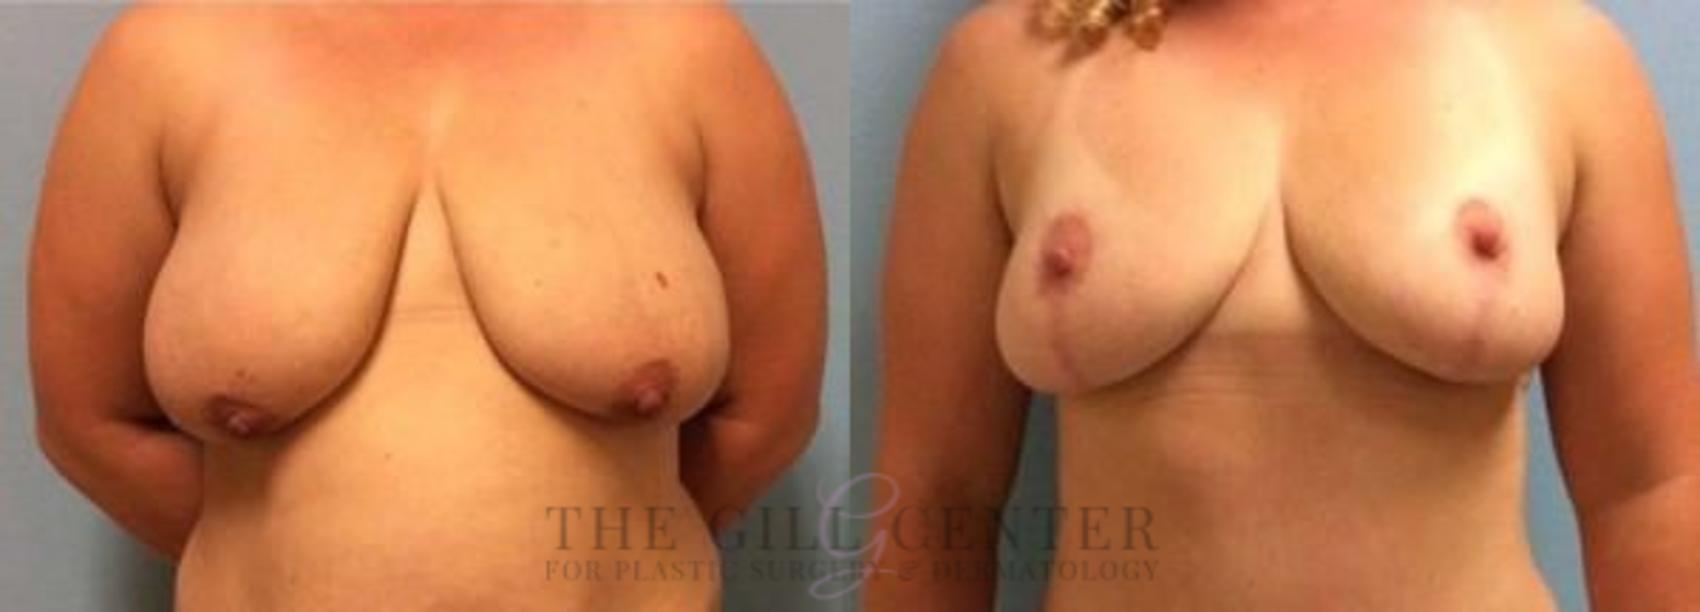 Breast Lift Case 80 Before & After Front | The Woodlands, TX | The Gill Center for Plastic Surgery and Dermatology